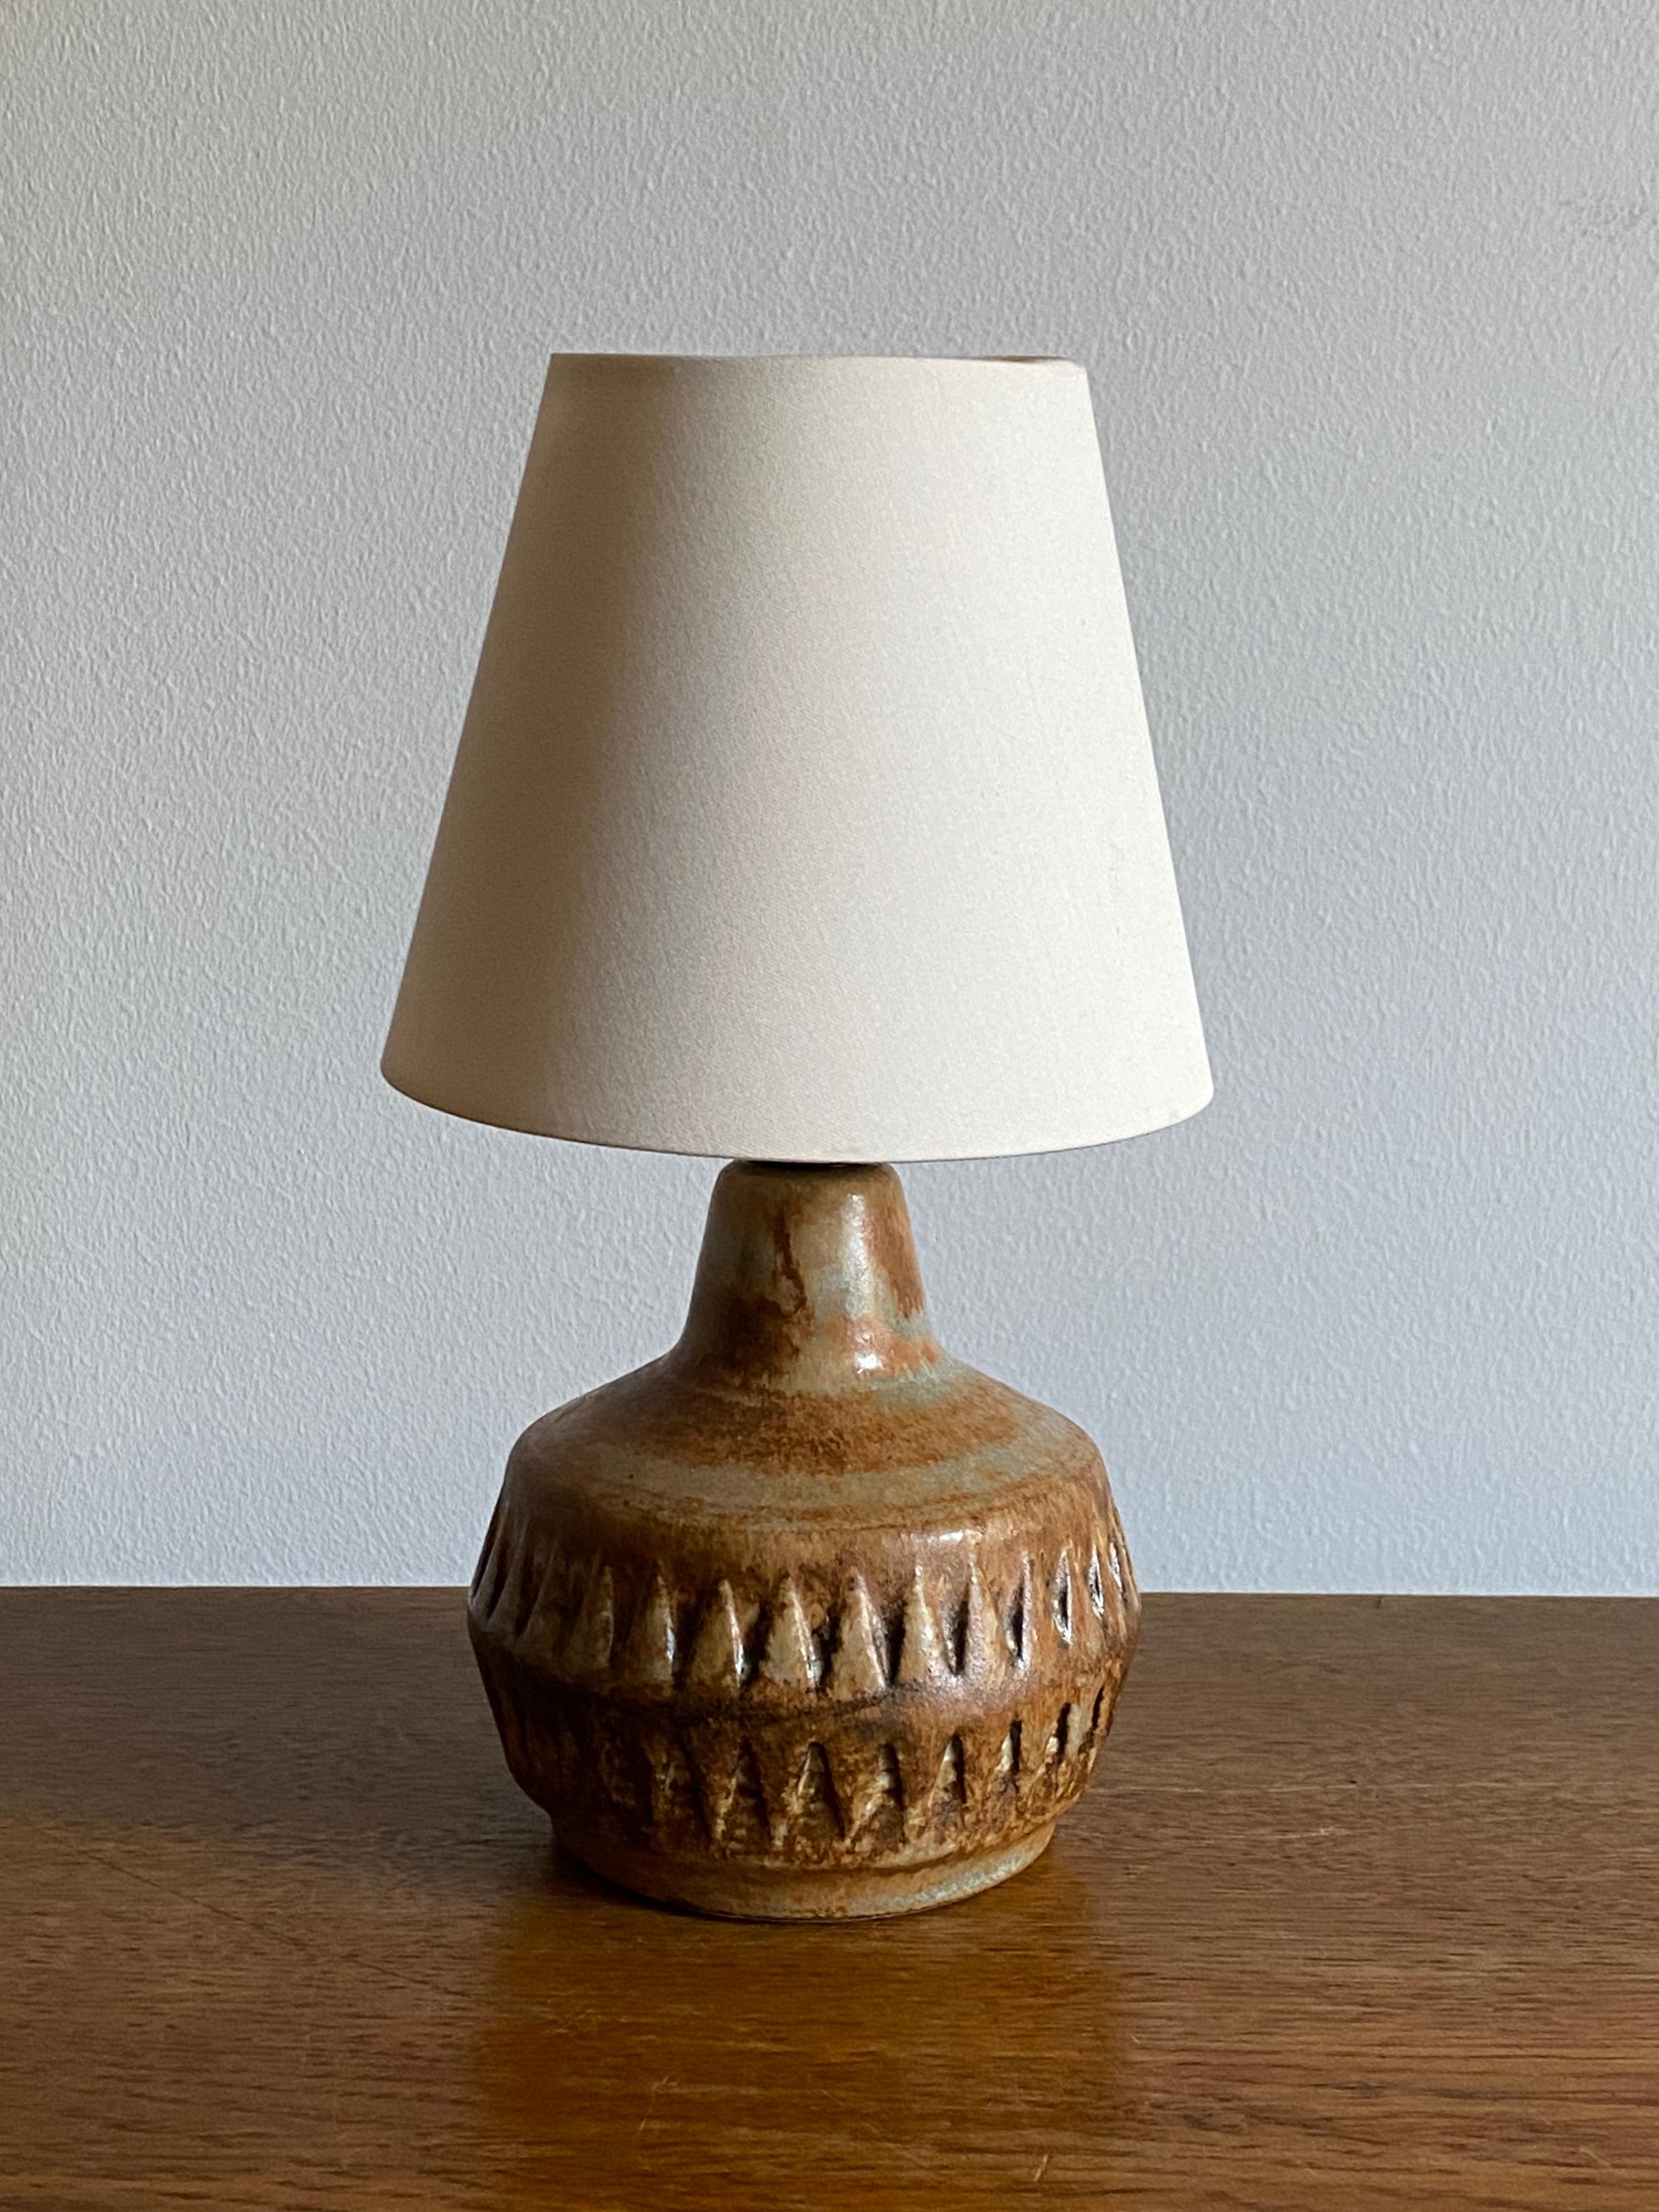 A stoneware table lamp, executed by Bruno Karlsson in abstract form and highly artistic brown / yellow / beige glaze. In his Studio, called 